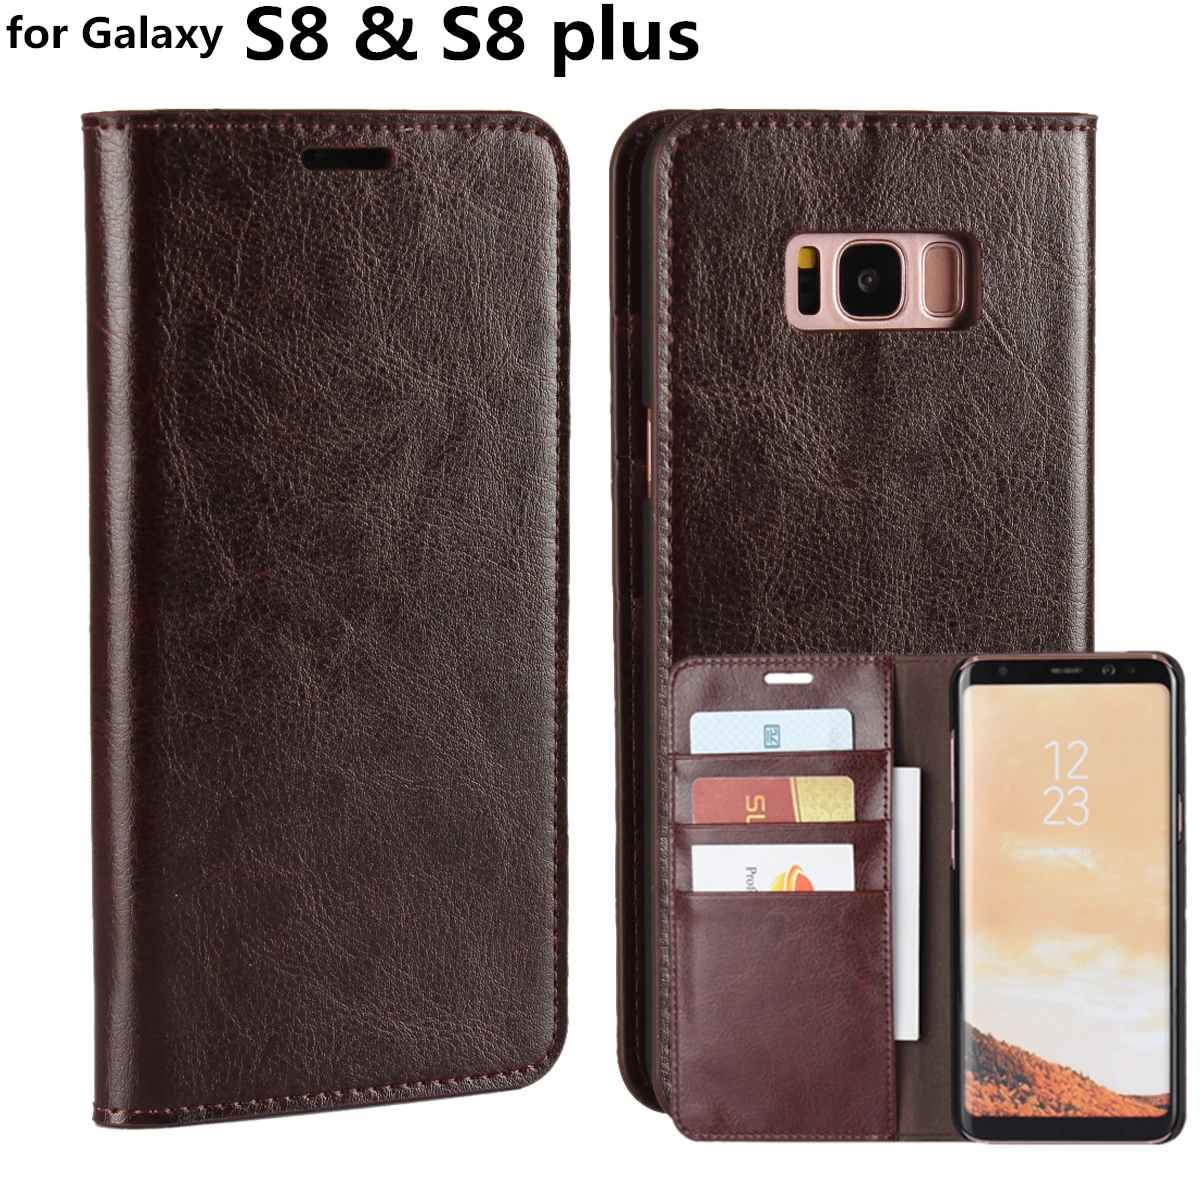 

Deluxe Wallet Case For Samsung Galaxy S8 Plus premium leather Case Flip Cover Phone Bags for Galaxy S8 5.8" & 6.2"